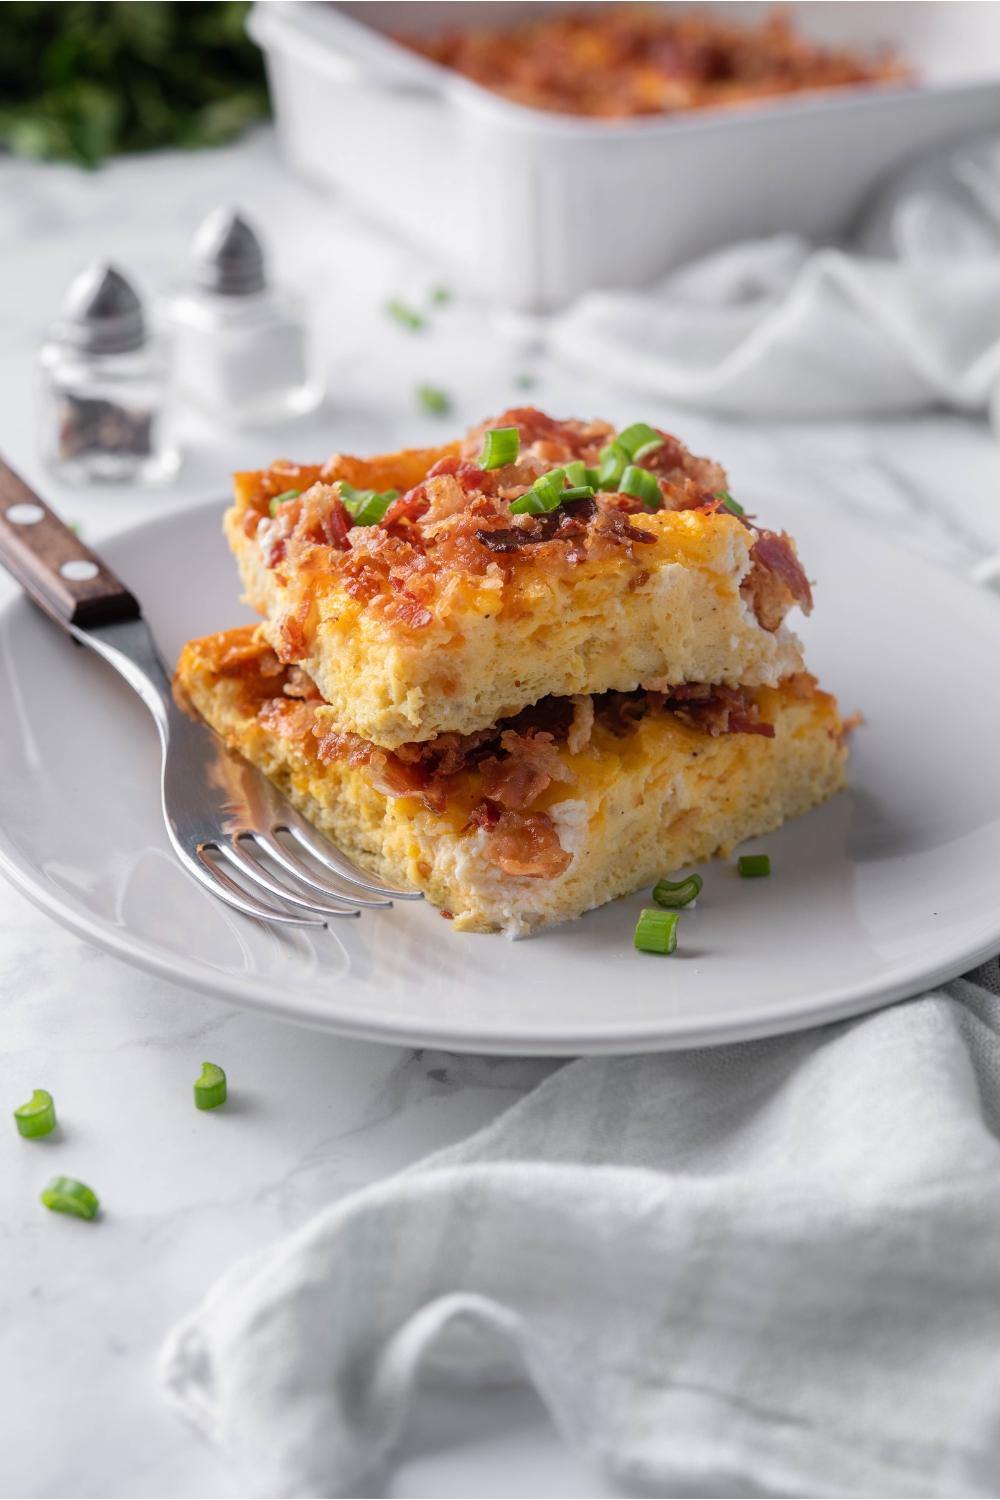 Two squares of egg and bacon breakfast casserole stacked on top of each other and garnished with green onions. There is a fork on the plate.